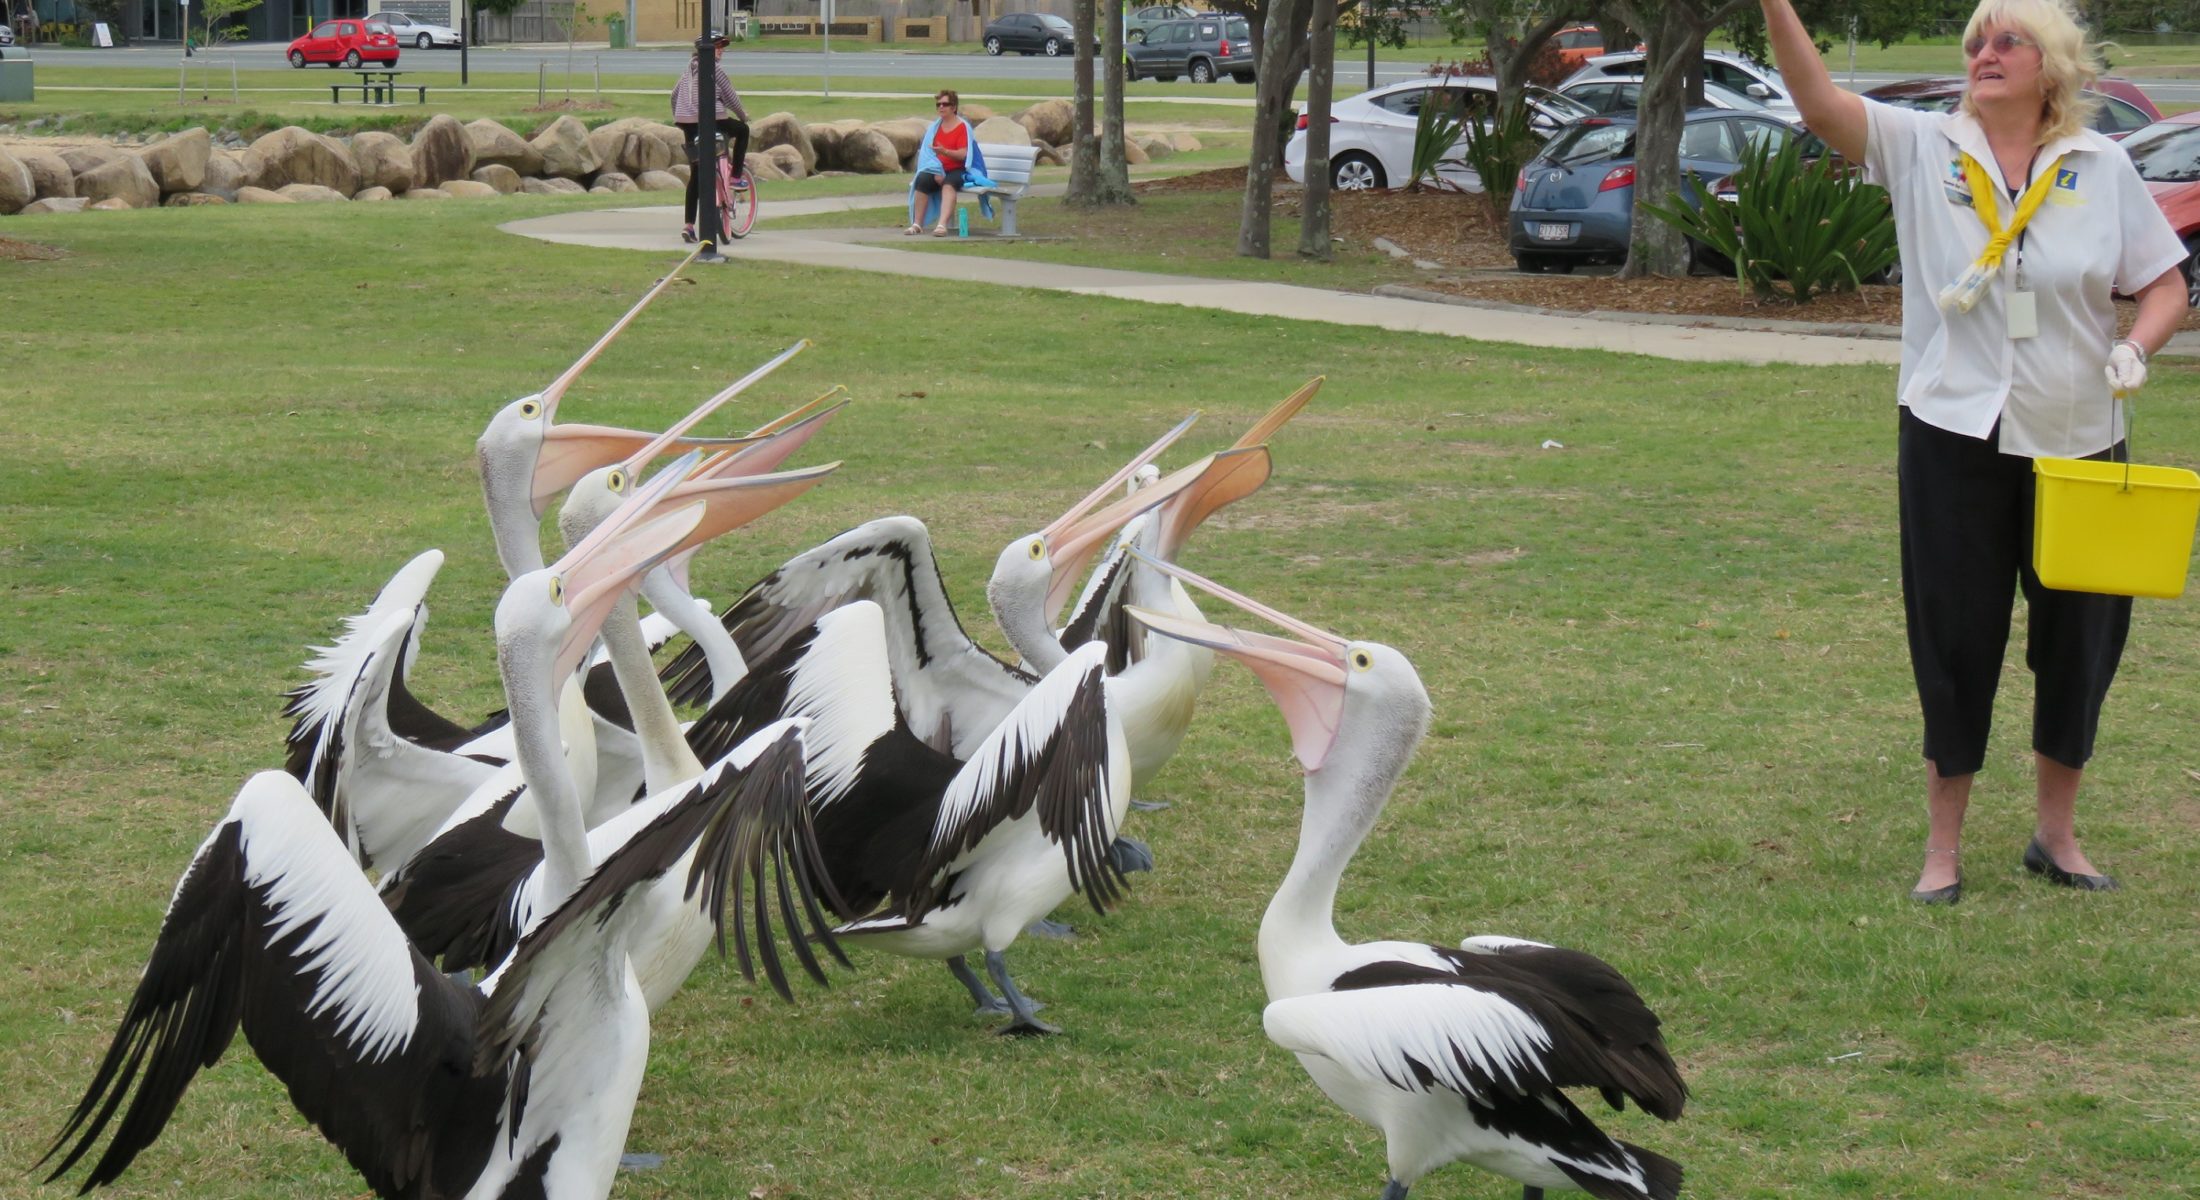 Watch the pelican feeding and checking daily at Pelican Park